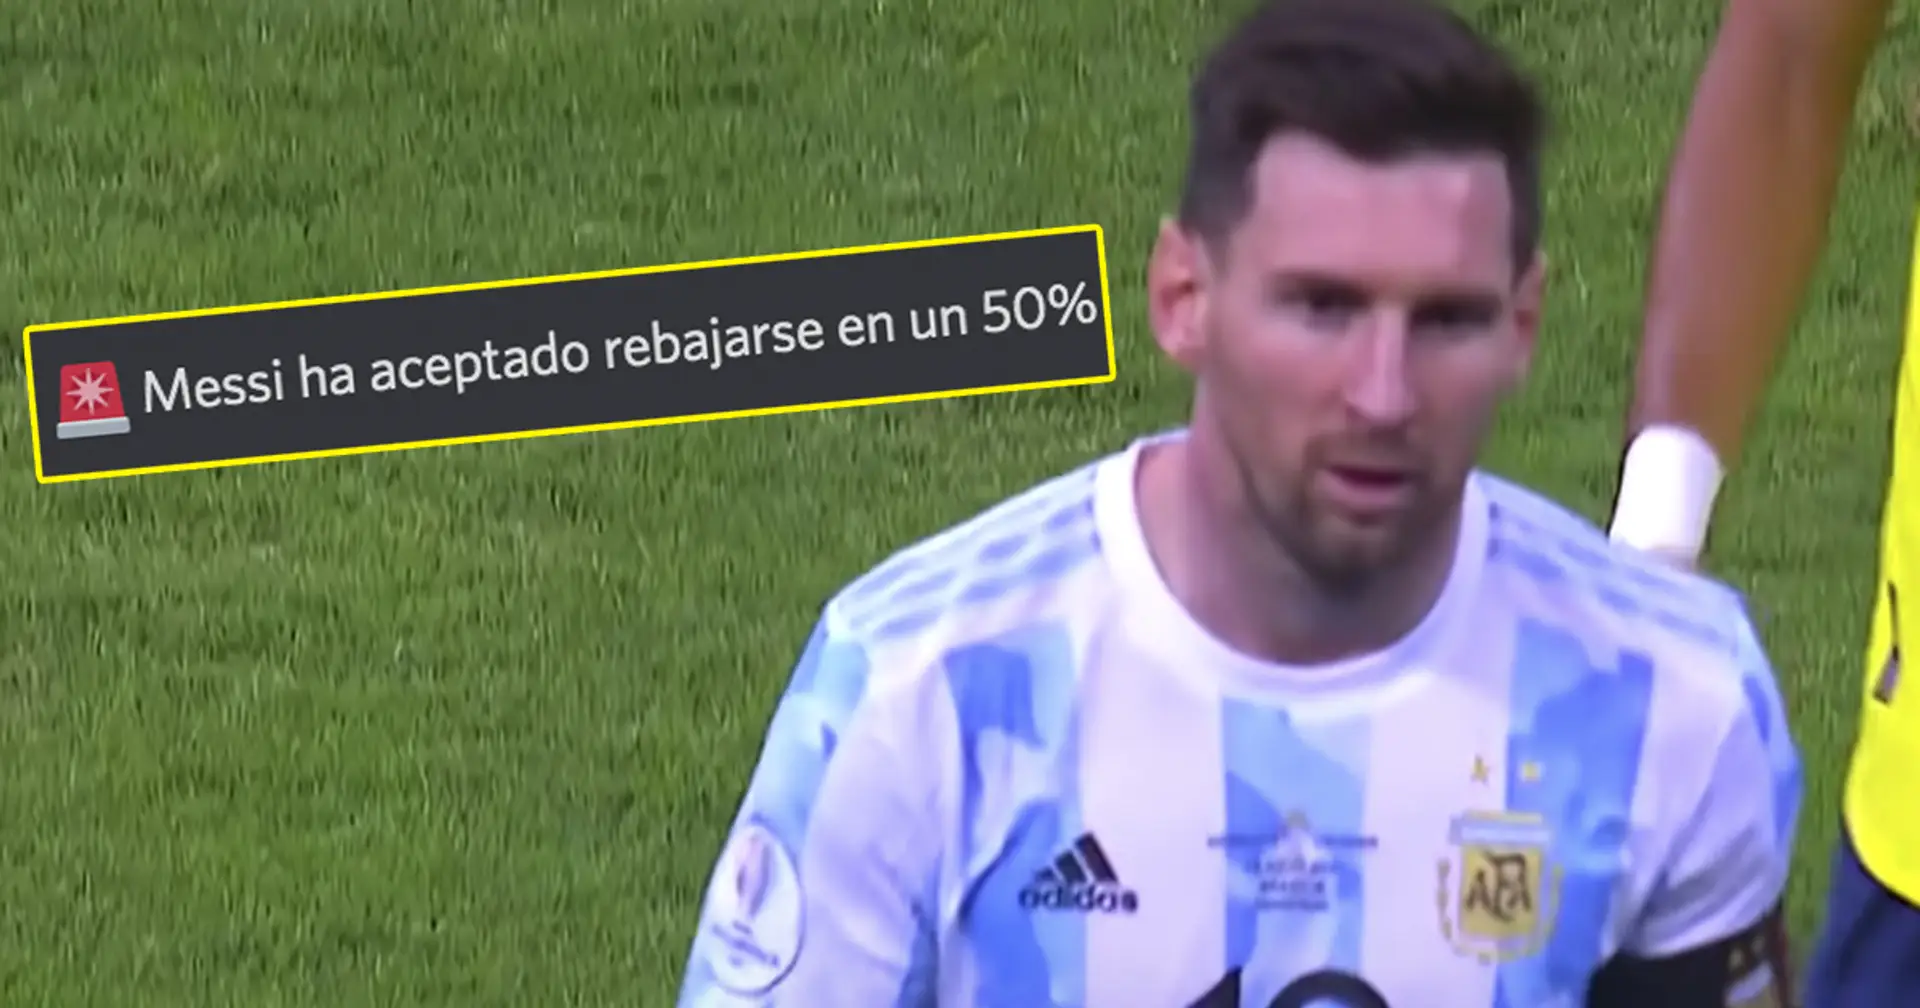 Messi accepts 50 per cent pay cut as he 'understands the club situation' – multiple sources